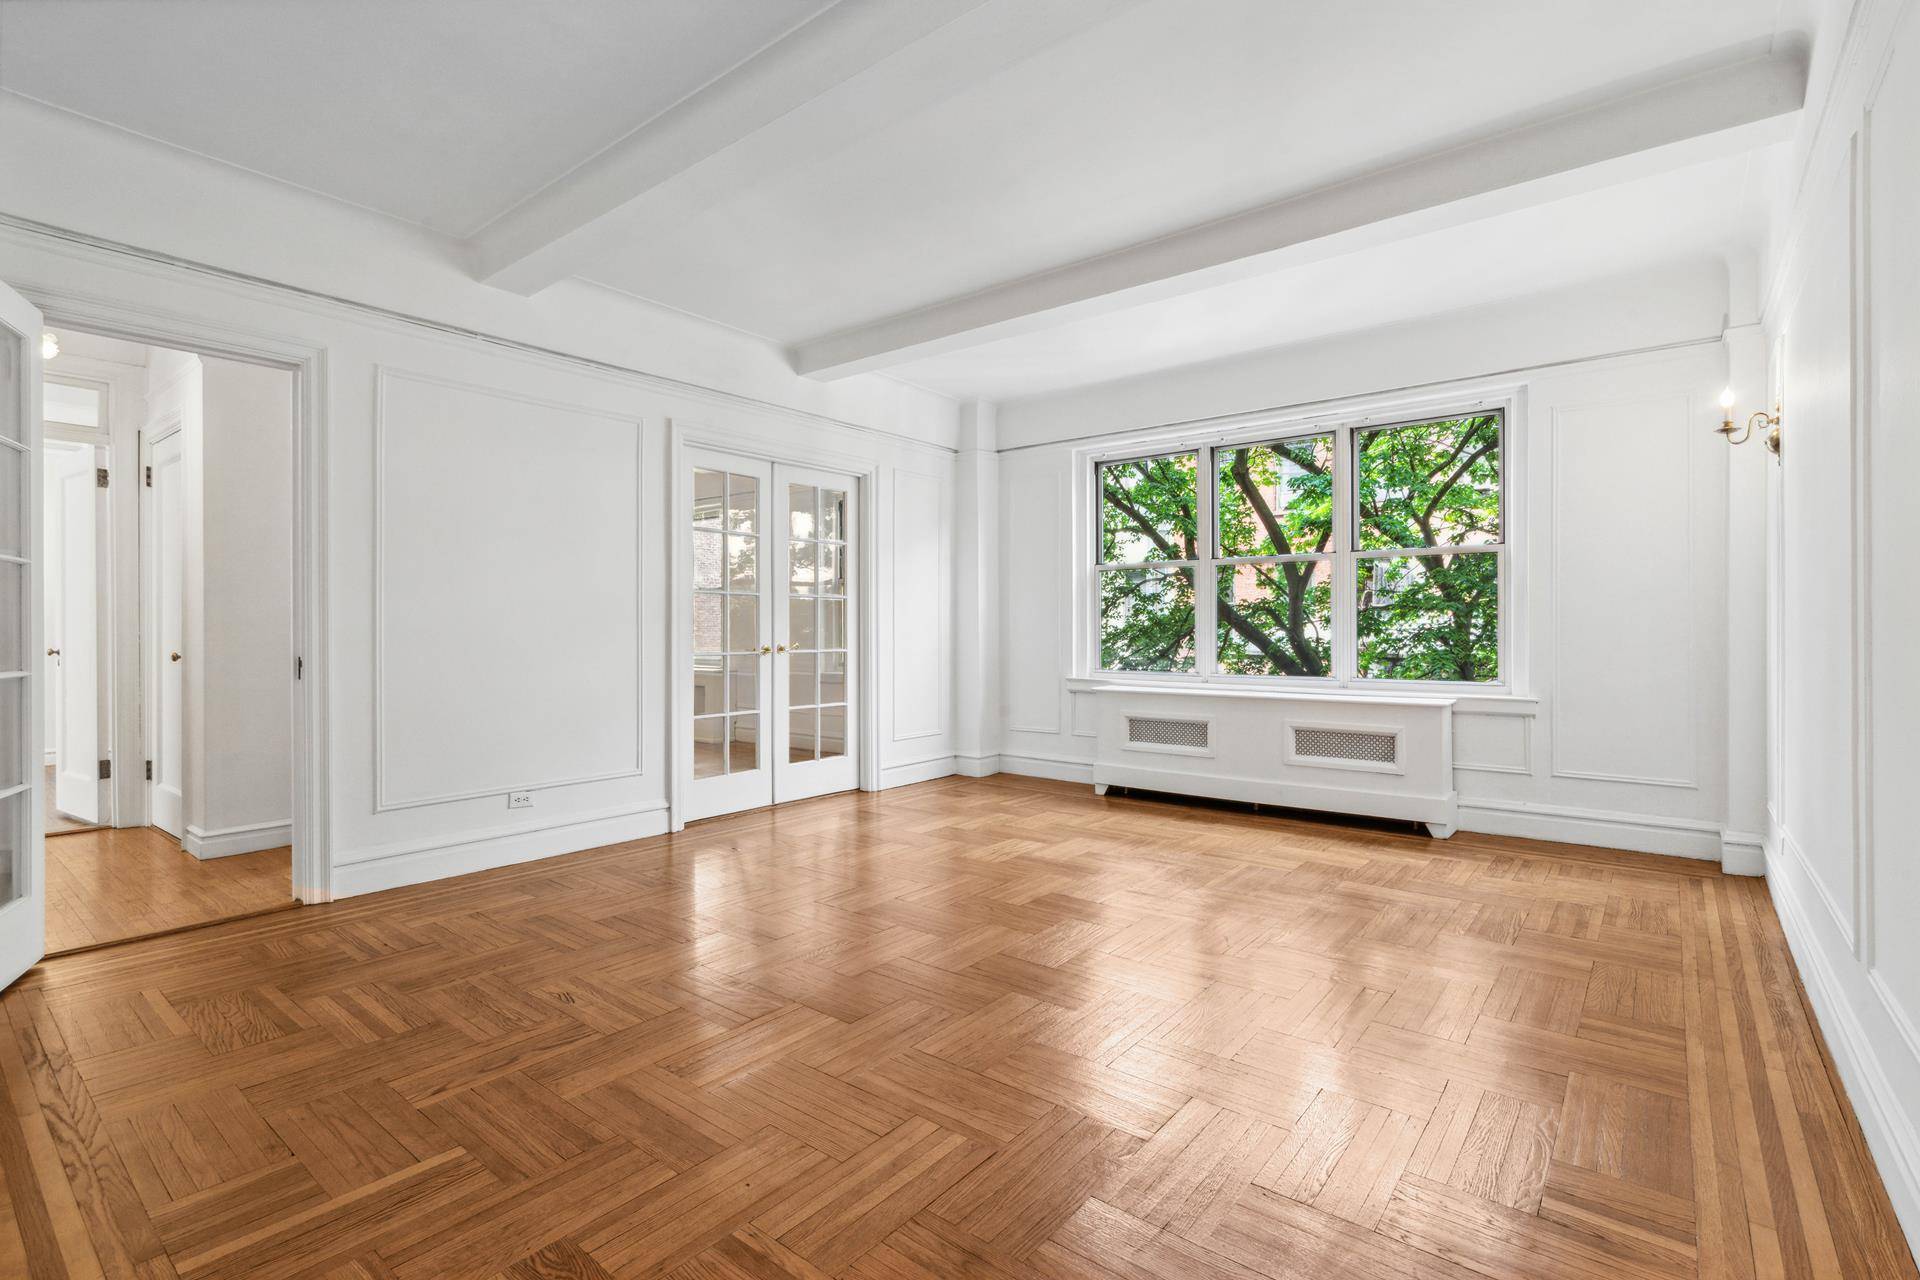 A dream two bedroom, one bath apartment with classic Upper Westside charm featuring spacious rooms, prewar details such as hardwood floors, beamed ceilings, picture moldings, French doors and transoms.